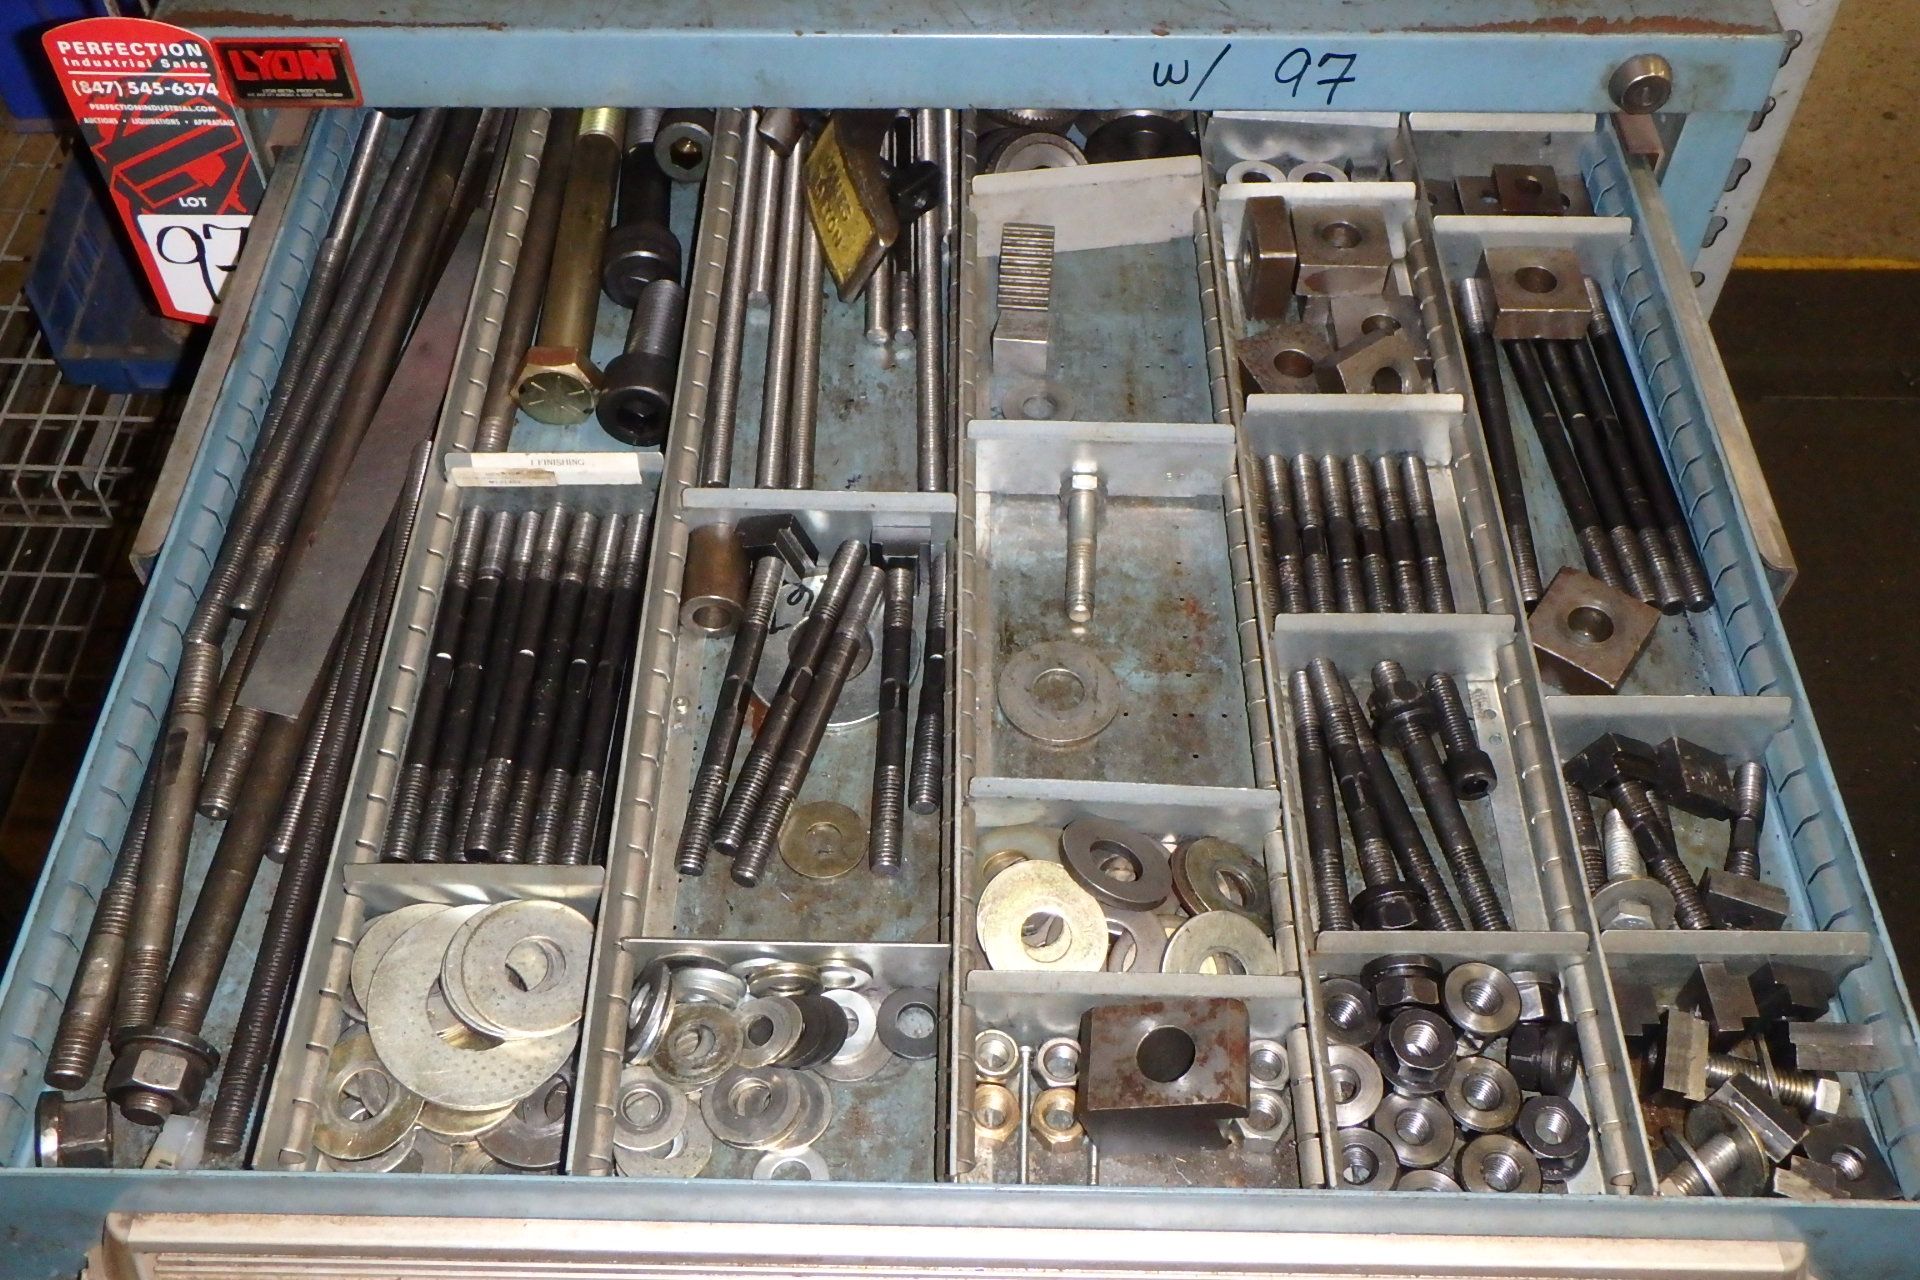 Lot Comprising Horizontal Cutters, Spacers, Tapers, (1) LYON 5-Drawer Cabinet, w/ Contents of Hold - Image 3 of 7